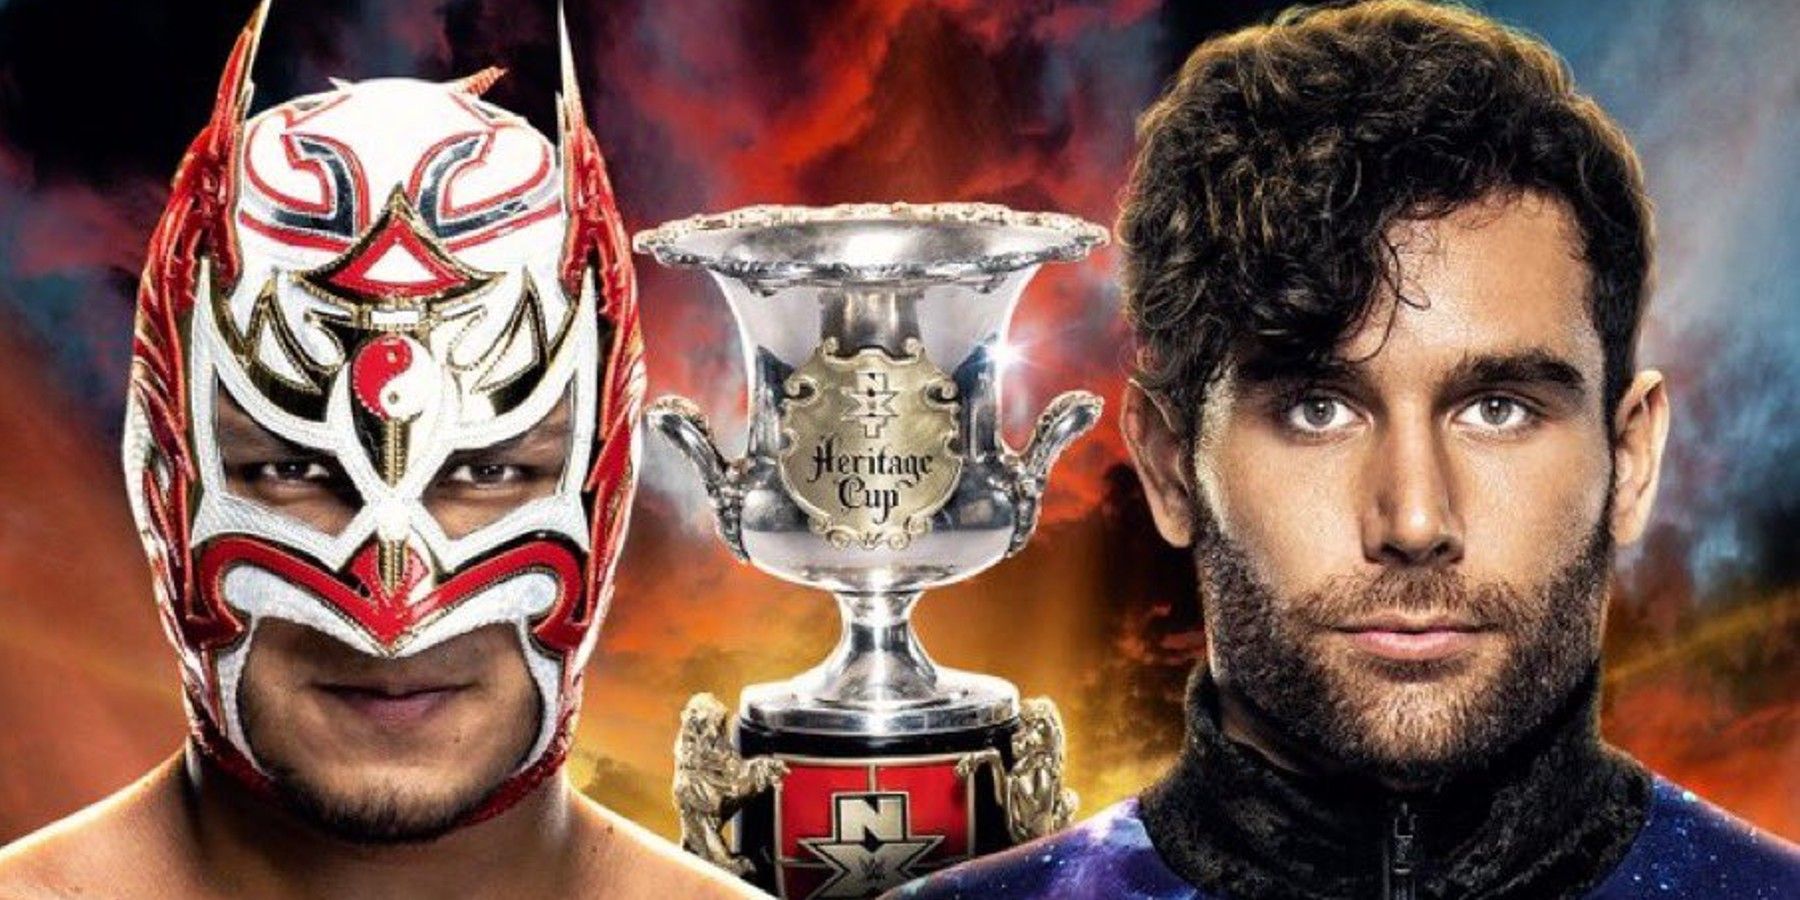 Dragon Lee and Noam Dar NXT Battleground 2023 graphic for the Heritage Cup 